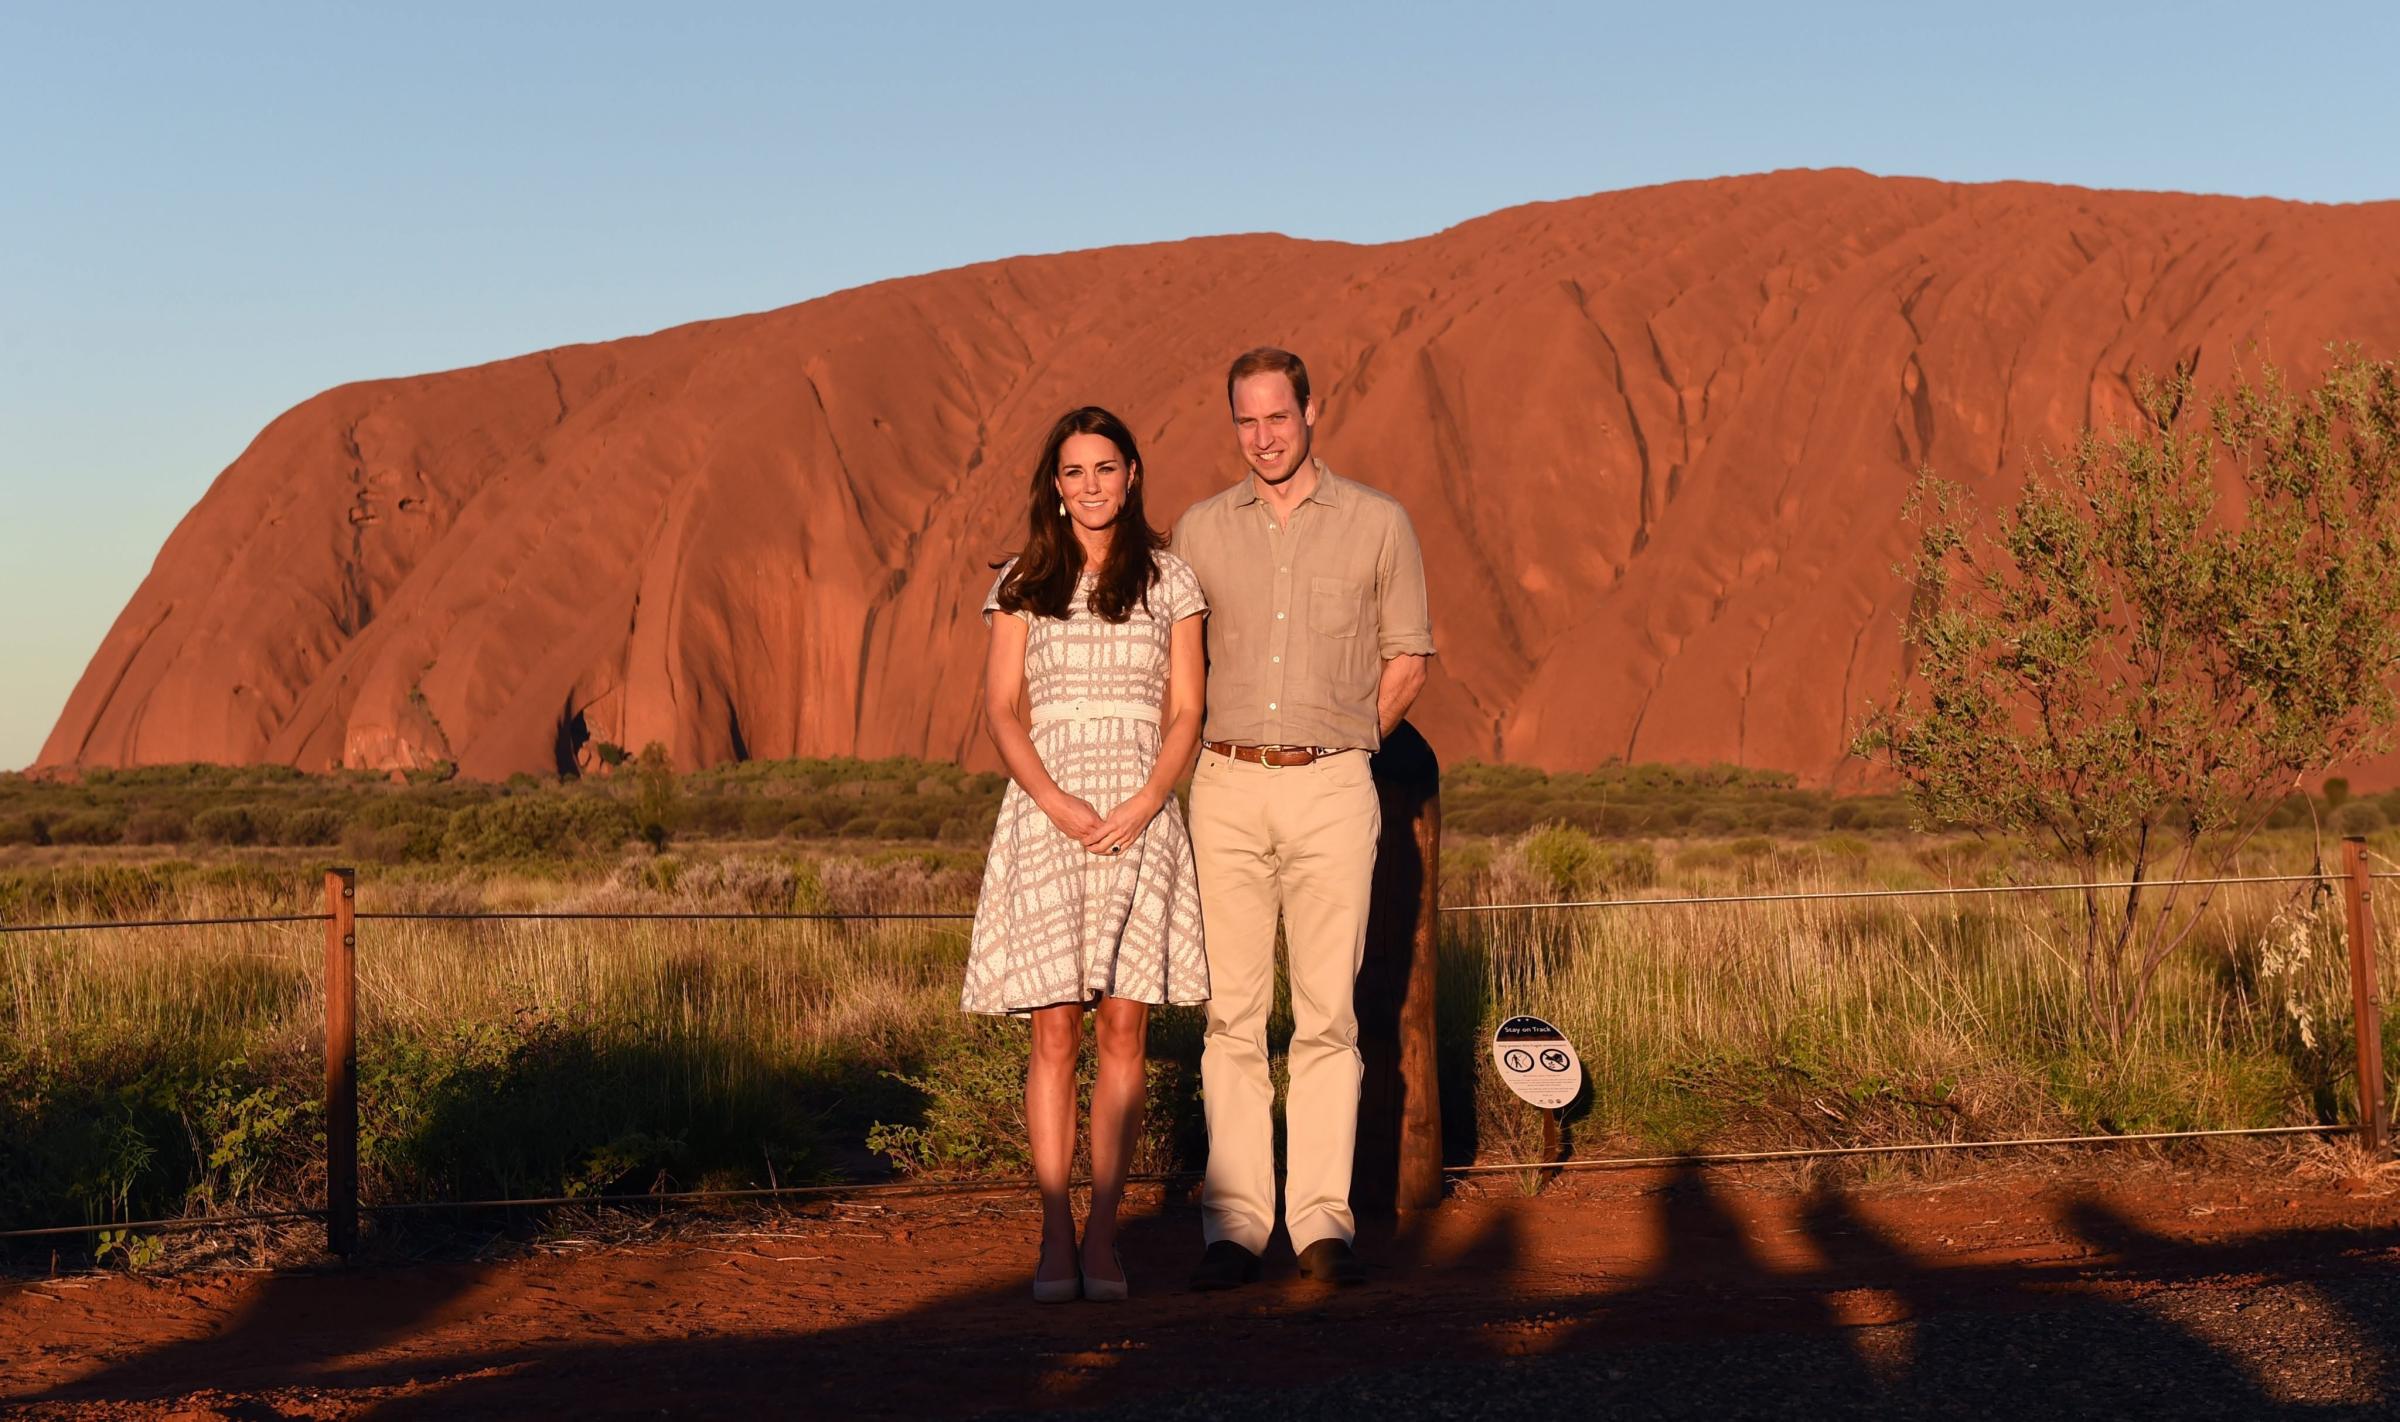 From right: Prince William, Duke of Cambridge and his wife Catherine, Duchess of Cambridge stand in front of Uluru in the Northern Territory, Australia, April 22, 2014.